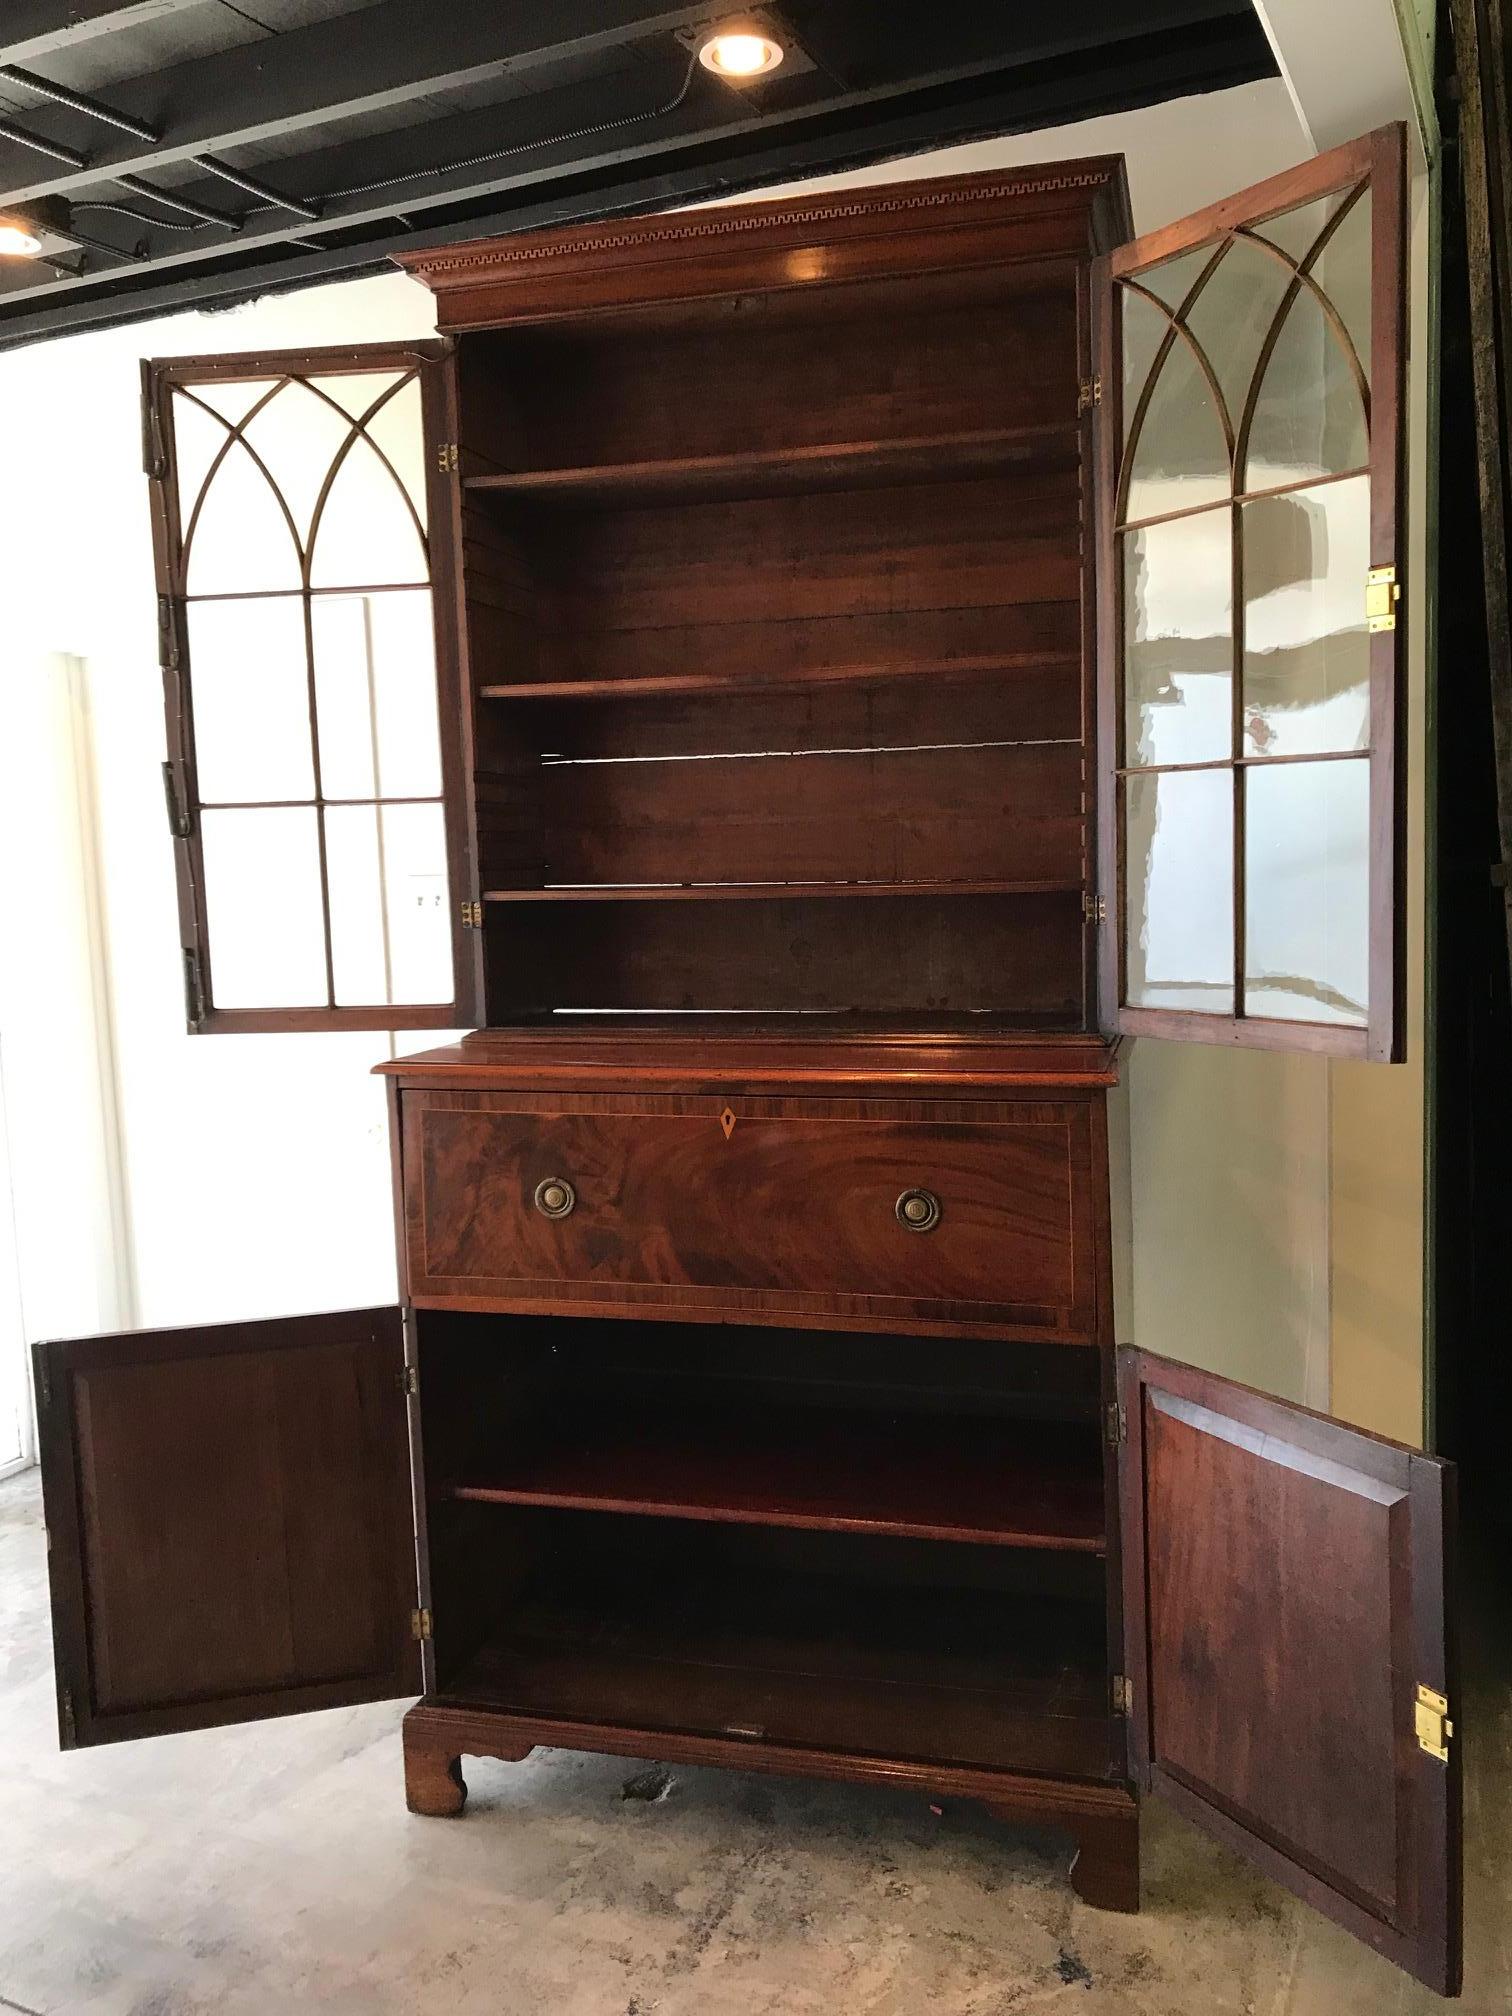 Neo-Gothic Early 19th Century Classical English Regency Bookcase Secretary Desk In Good Condition For Sale In West Hollywood, CA